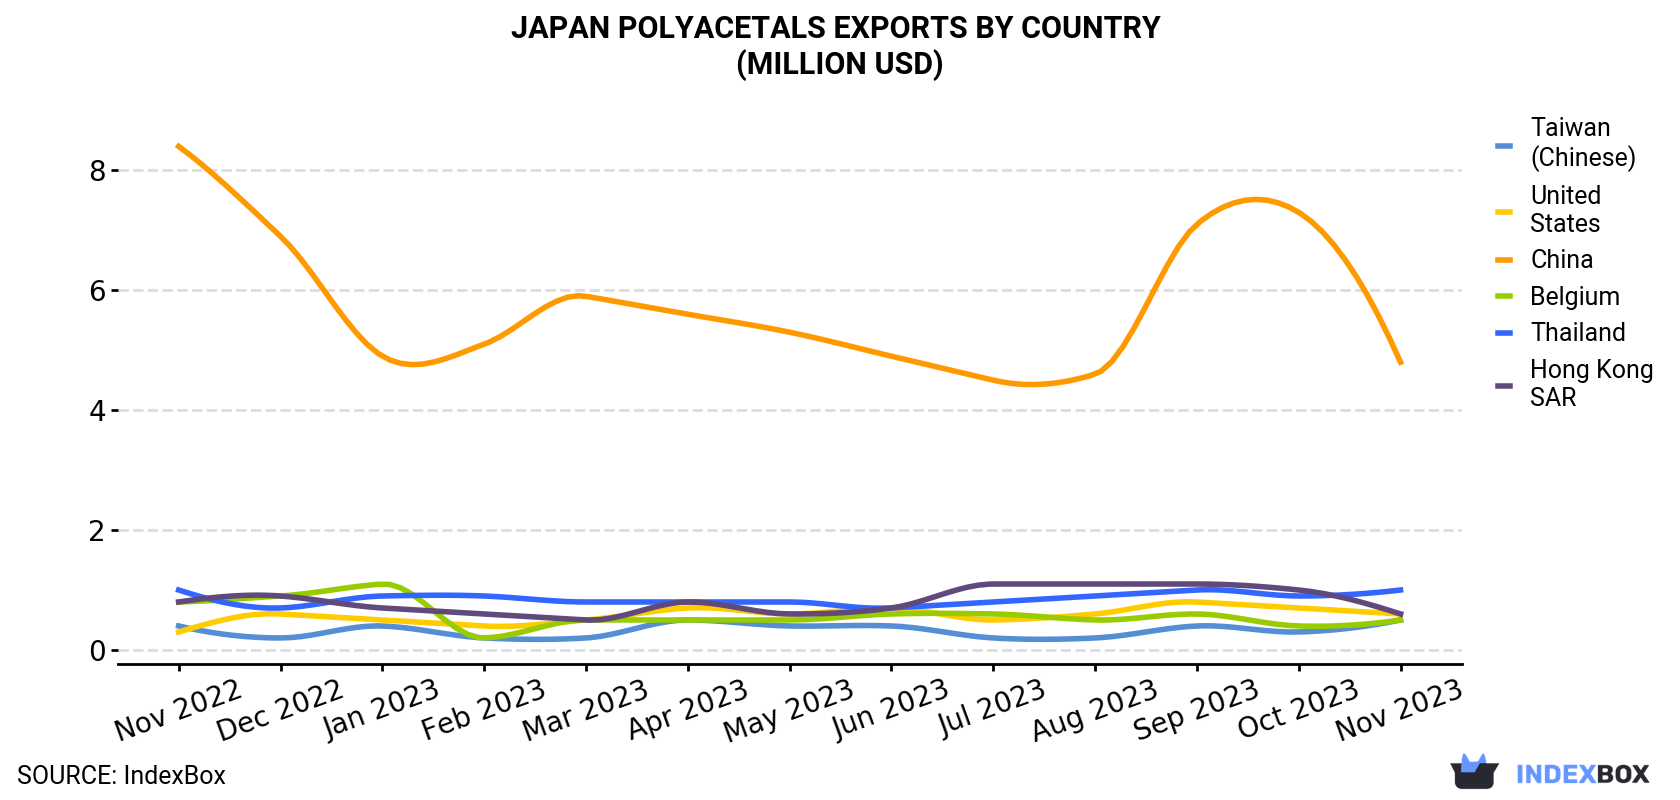 Japan Polyacetals Exports By Country (Million USD)